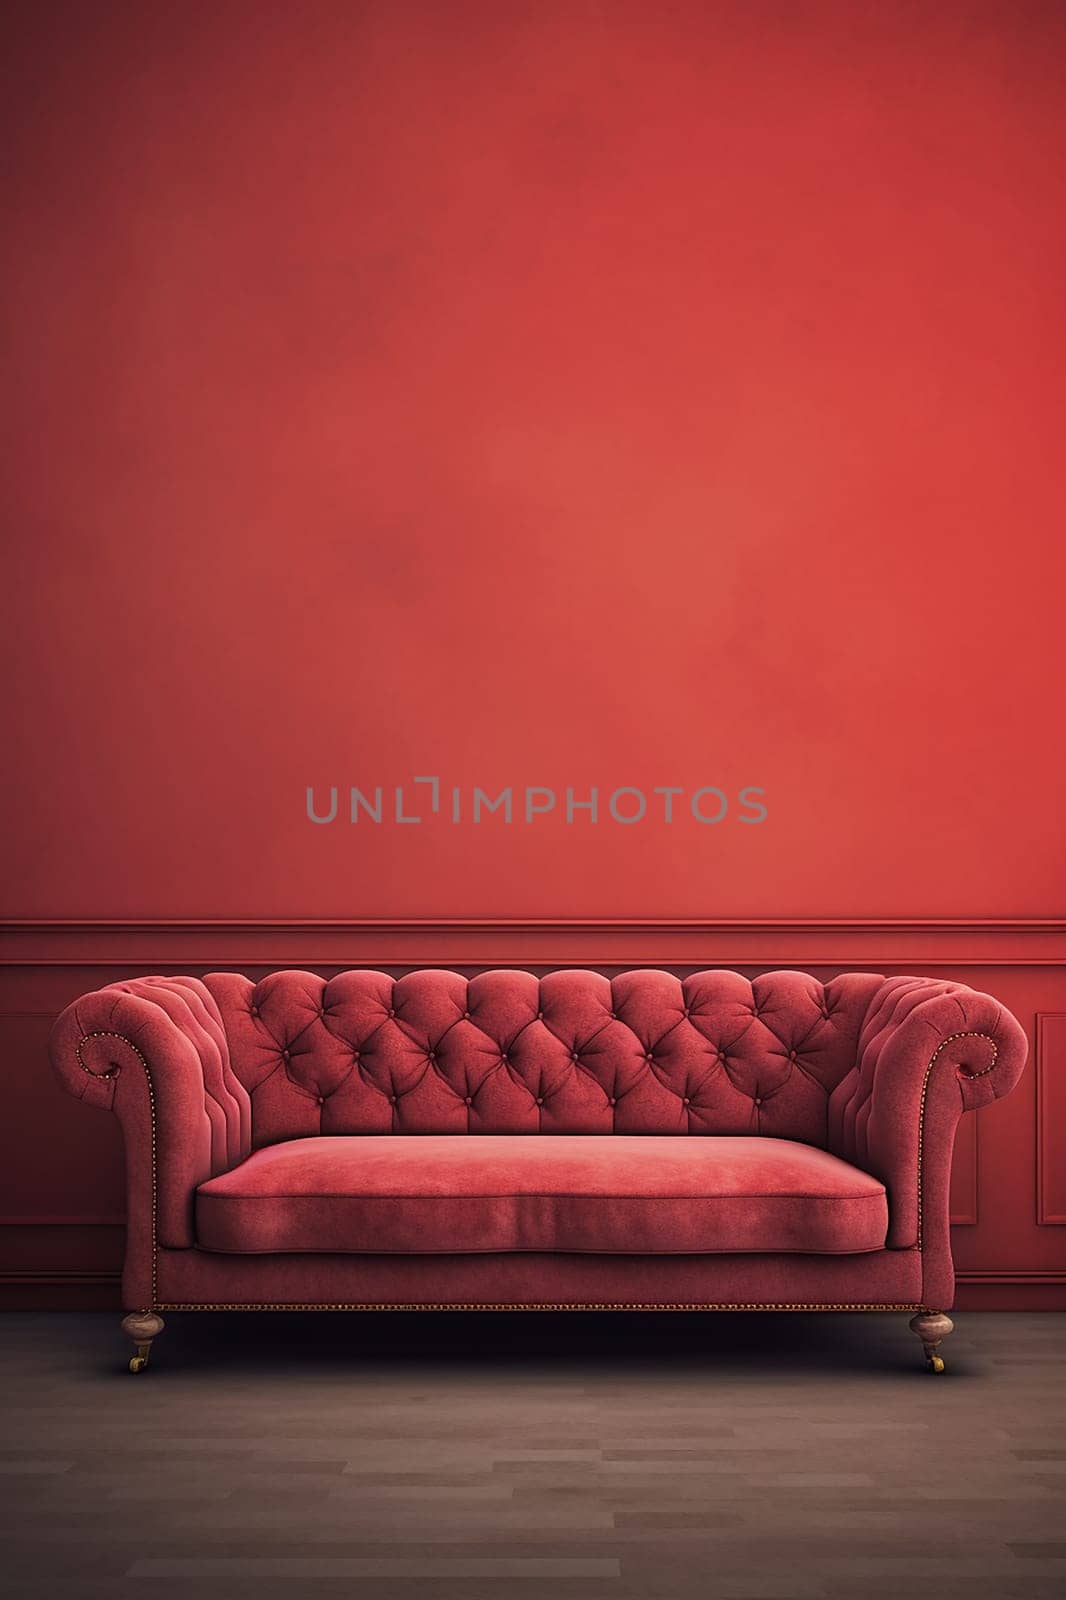 A Red Velvet Sofa in a Luxury and Elegant Living Room with red background